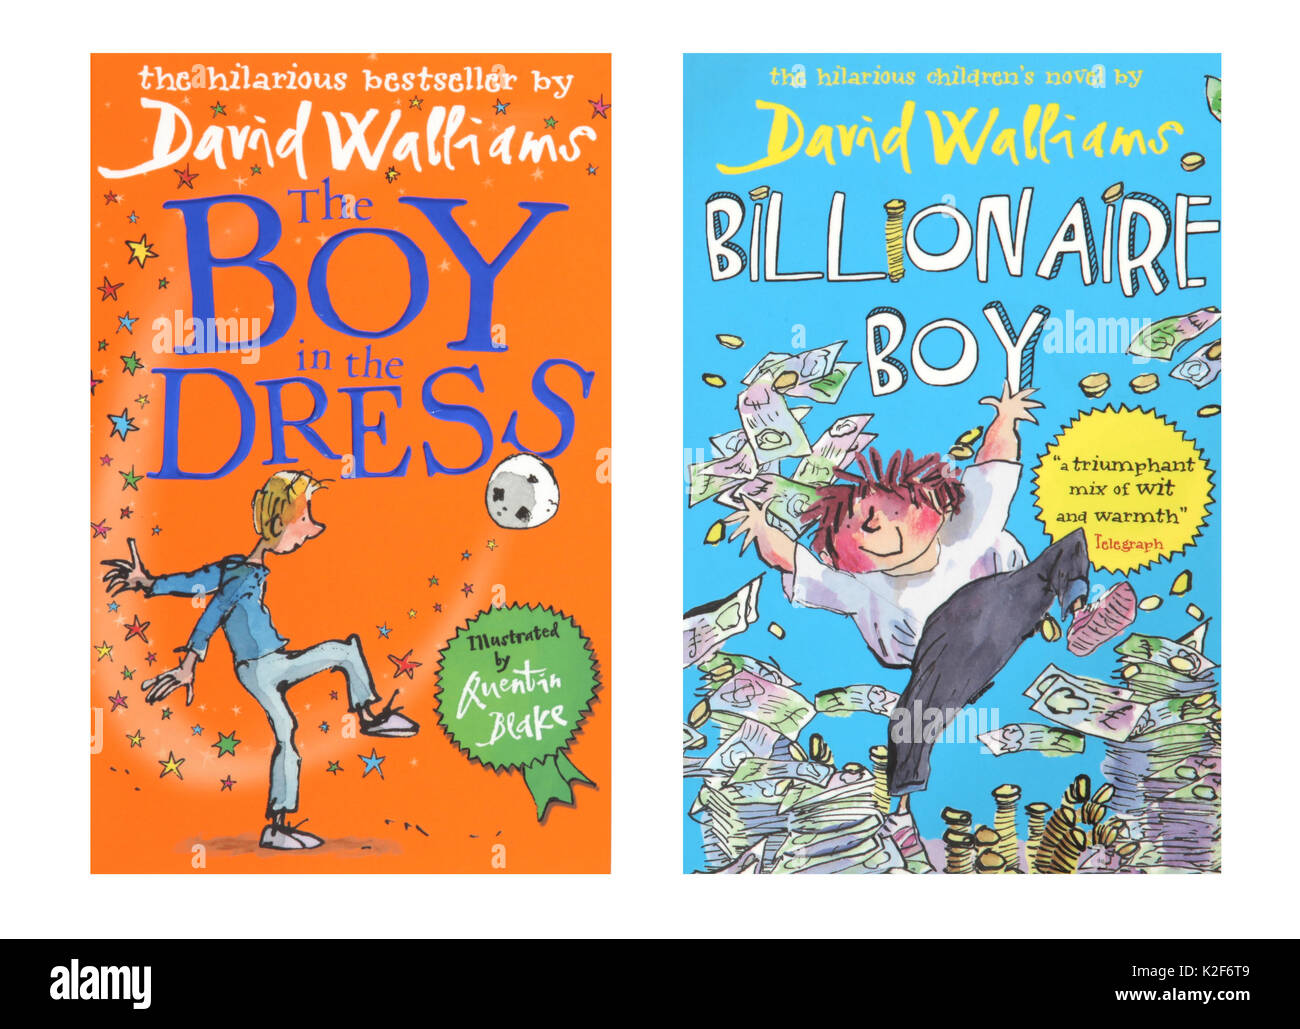 The Books The Boy in the Dress and Billionaire Boy by David Walliams Stock Photo